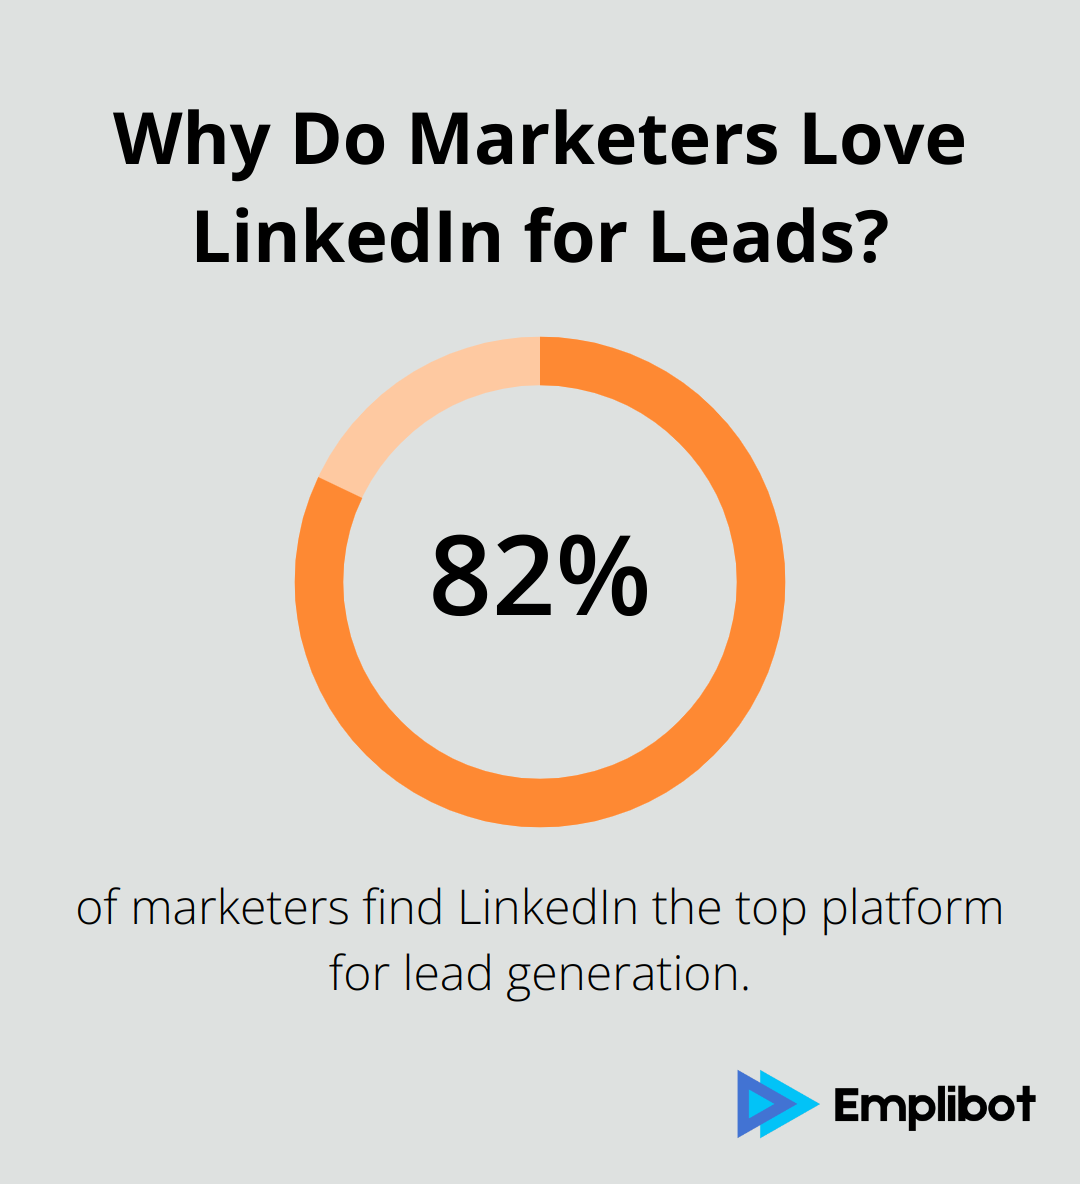 Why Do Marketers Love LinkedIn for Leads?